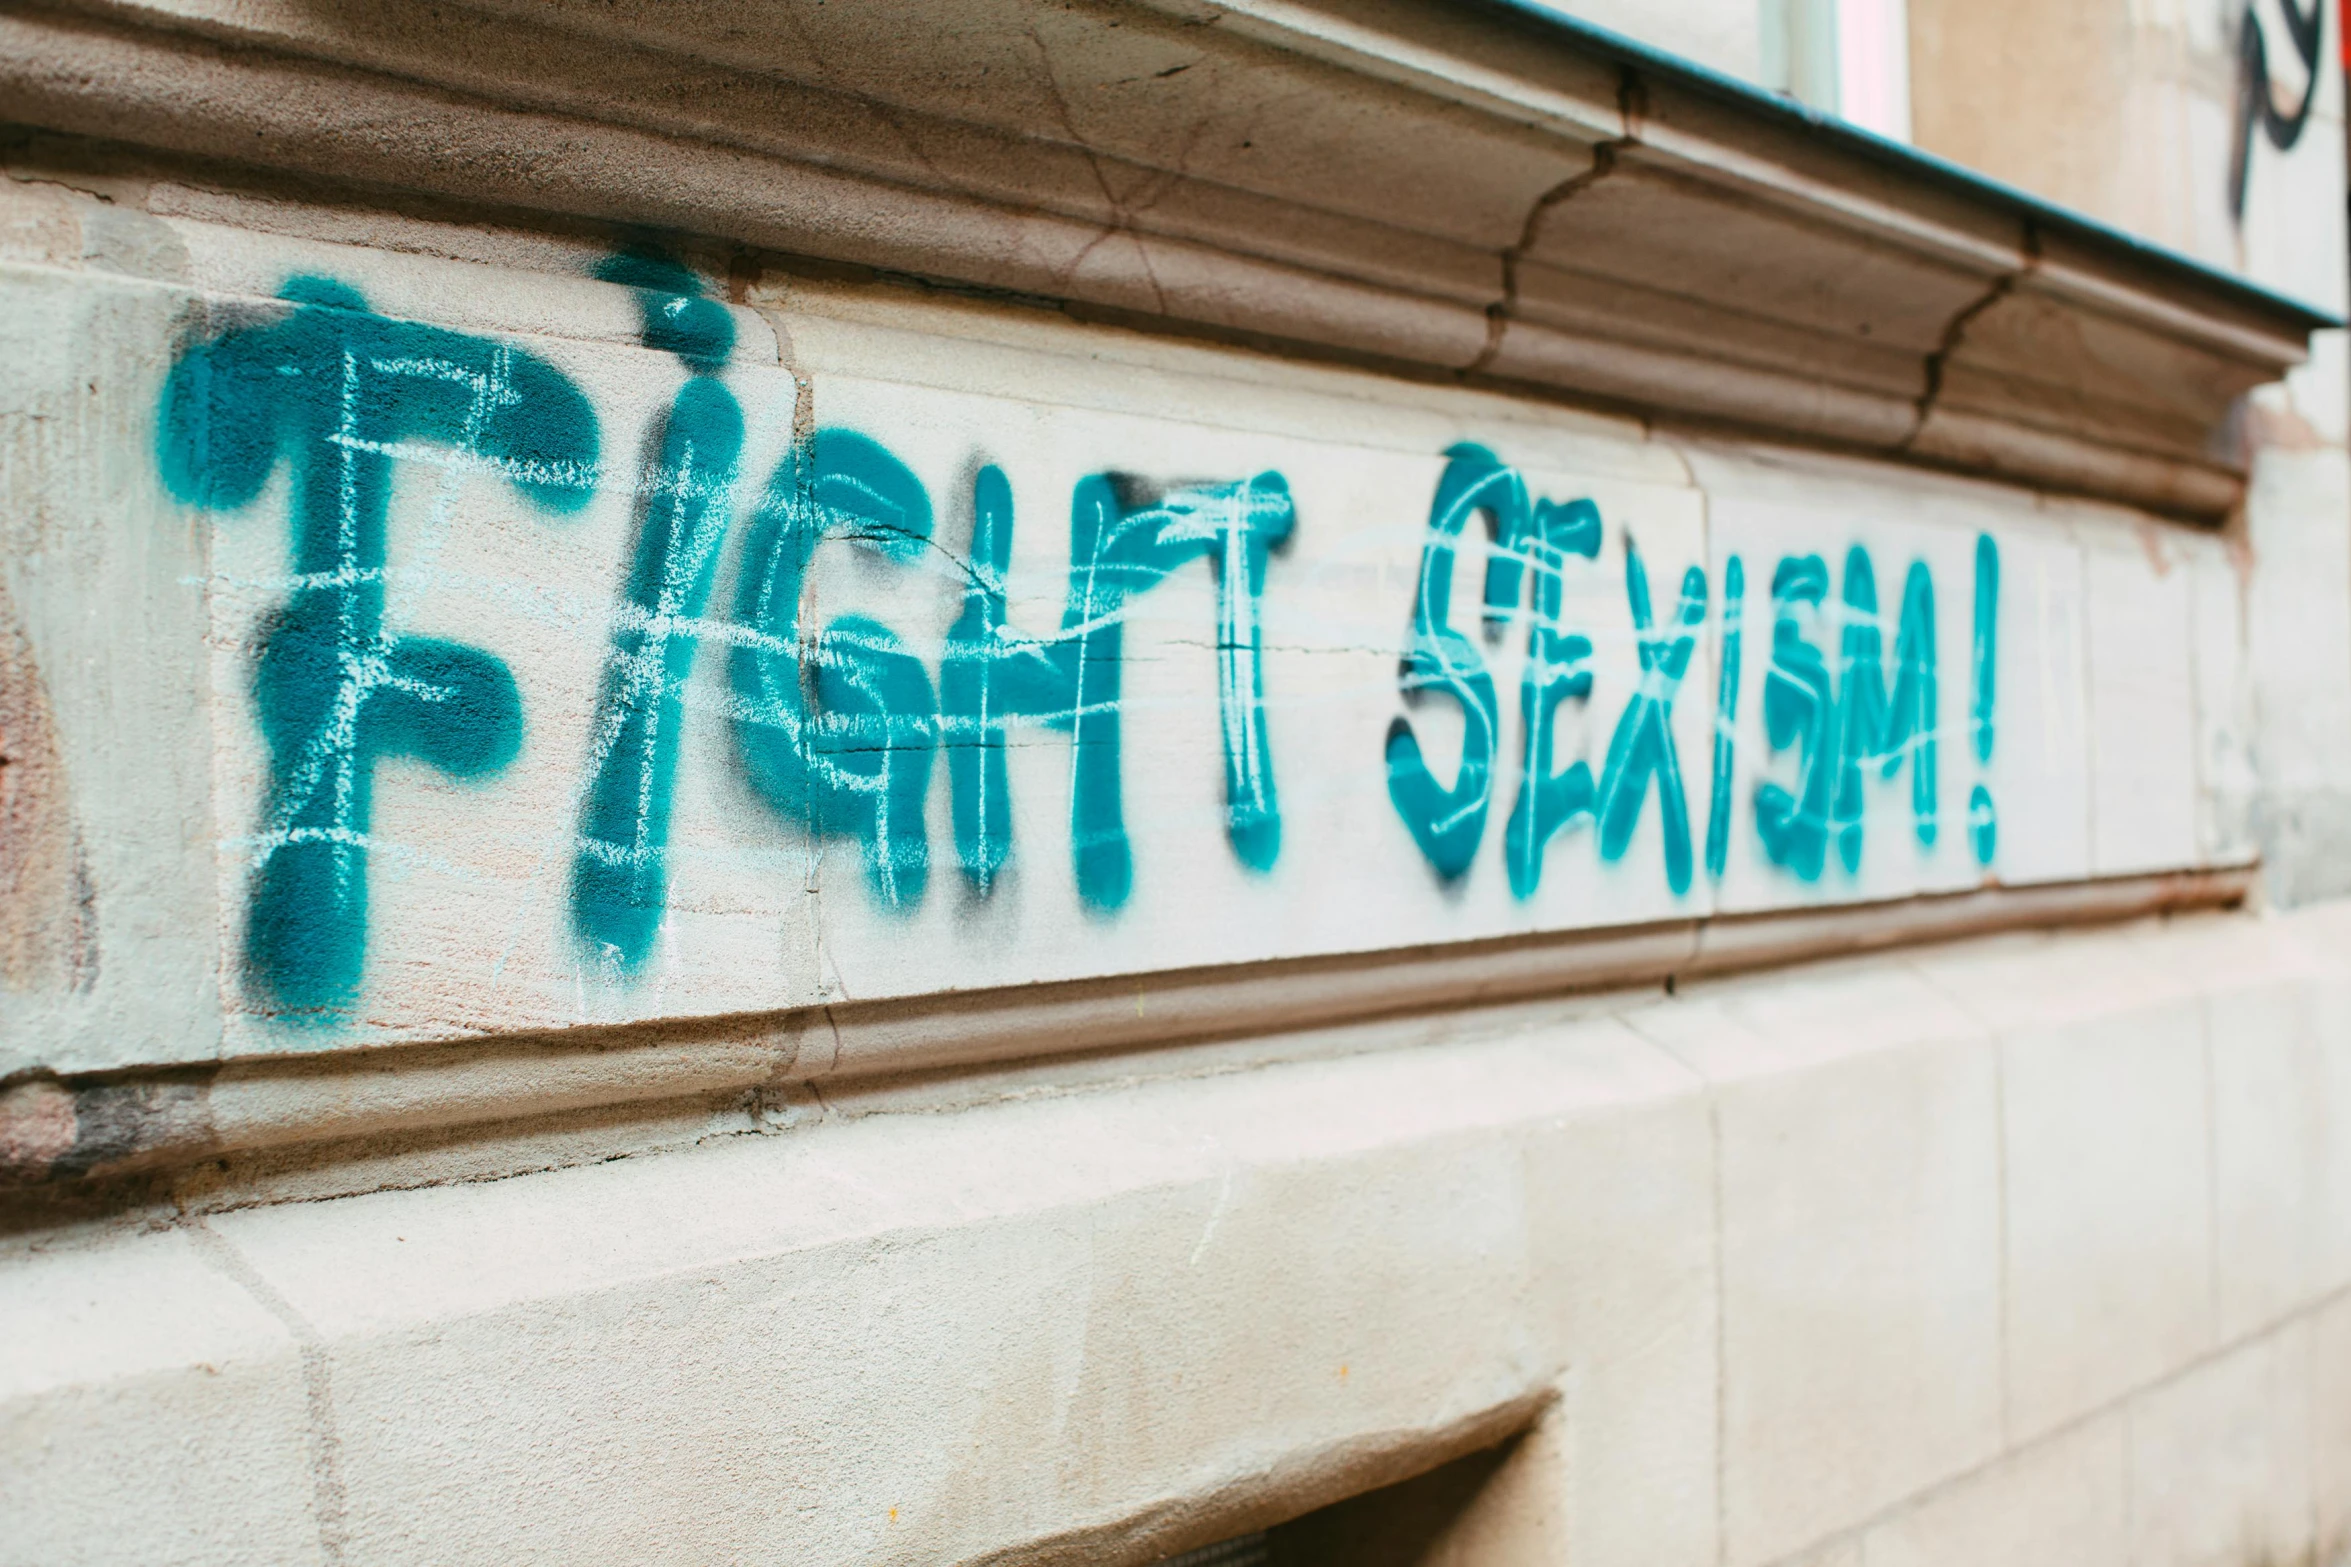 graffiti is spray painted on the side of a building, by Tracey Emin, trending on pexels, graffiti, activity with fight on swords, exist, street of teal stone, socialist